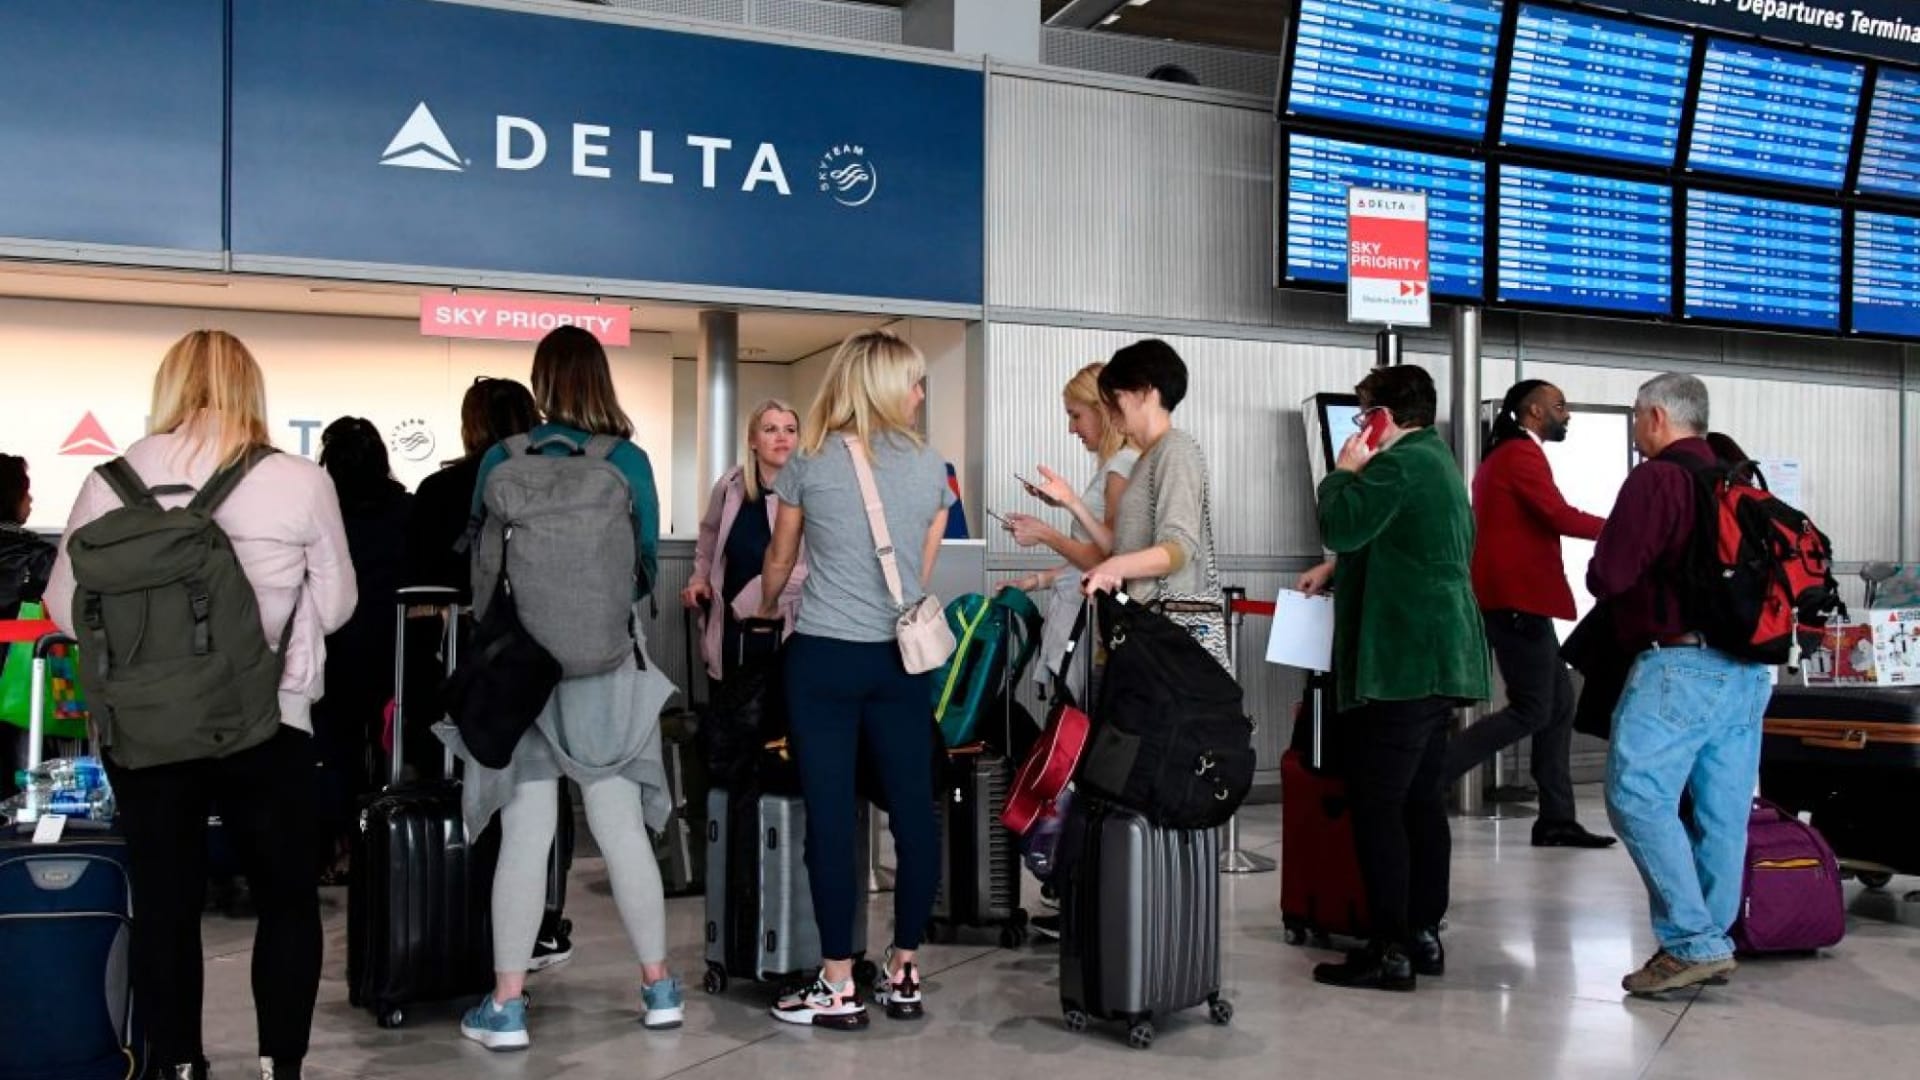 Delta Was Facing Intense Pushback From Unhappy Customers. Its Response Is Brilliant